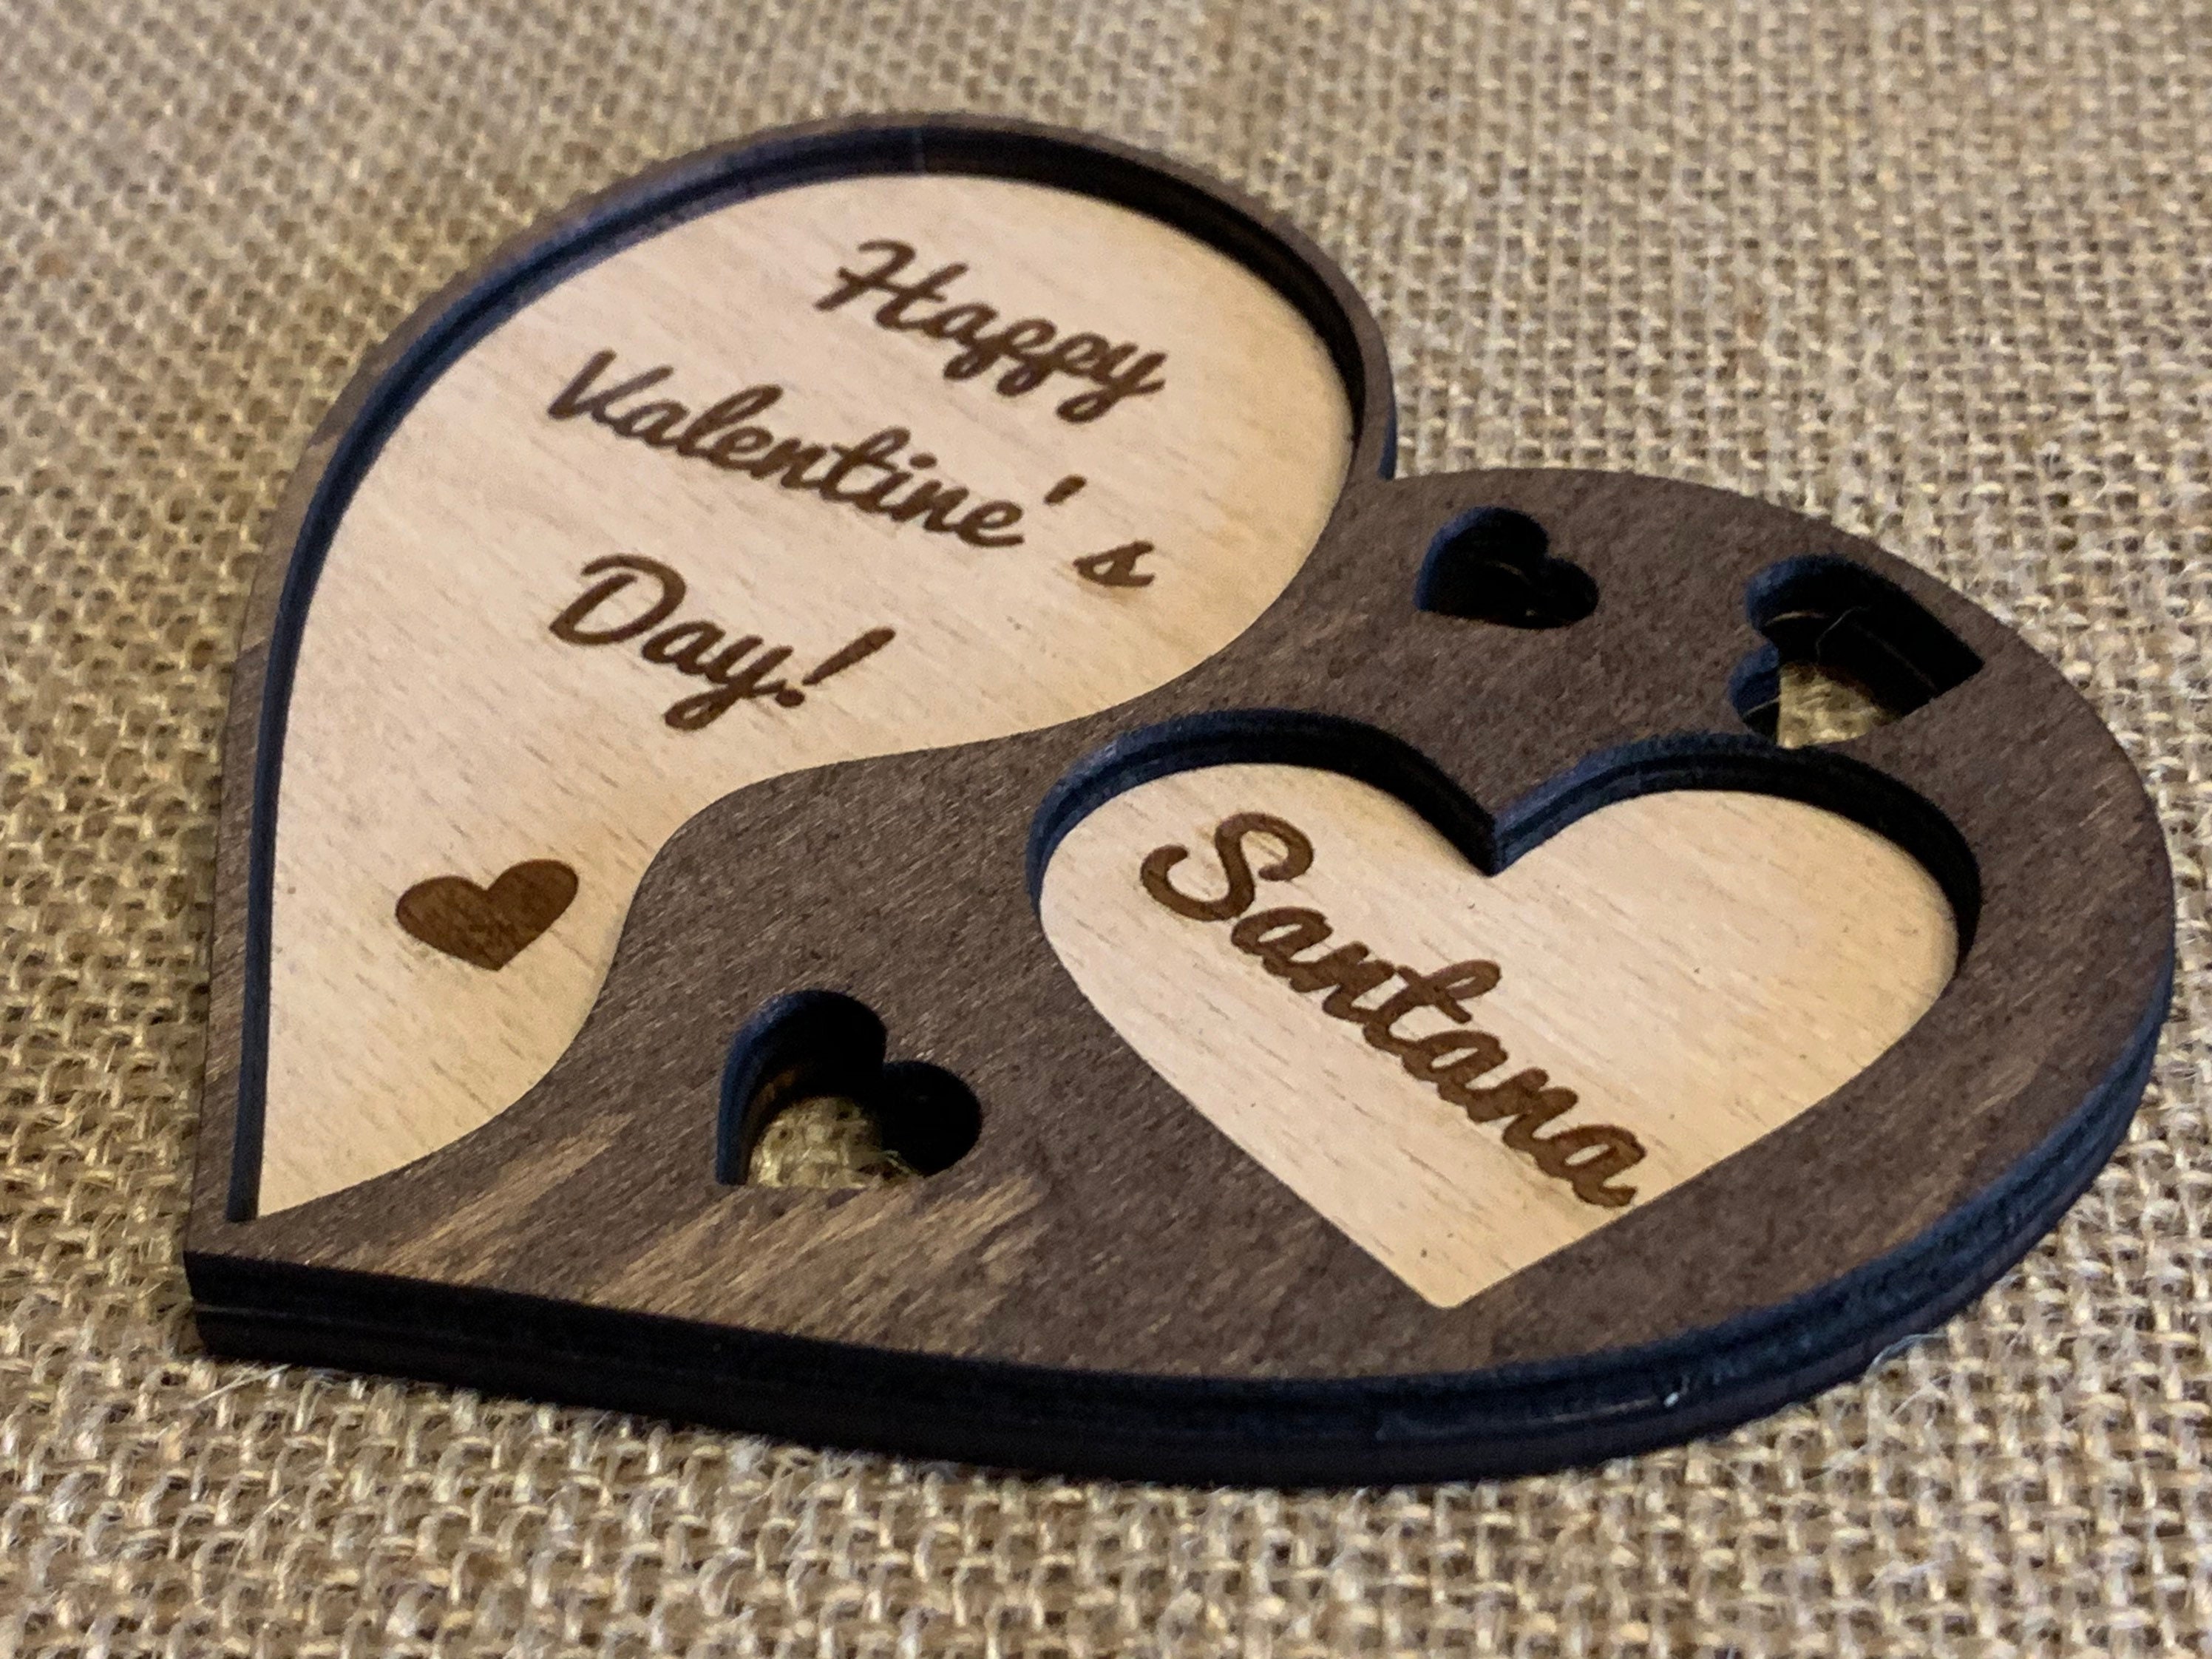 Sun&Beam Heart-shaped Wooden Decorative Hanging Handmade Hearts Ornaments  for Wedding Party Valentine Christmas Home Decoration Car Décor (Customize